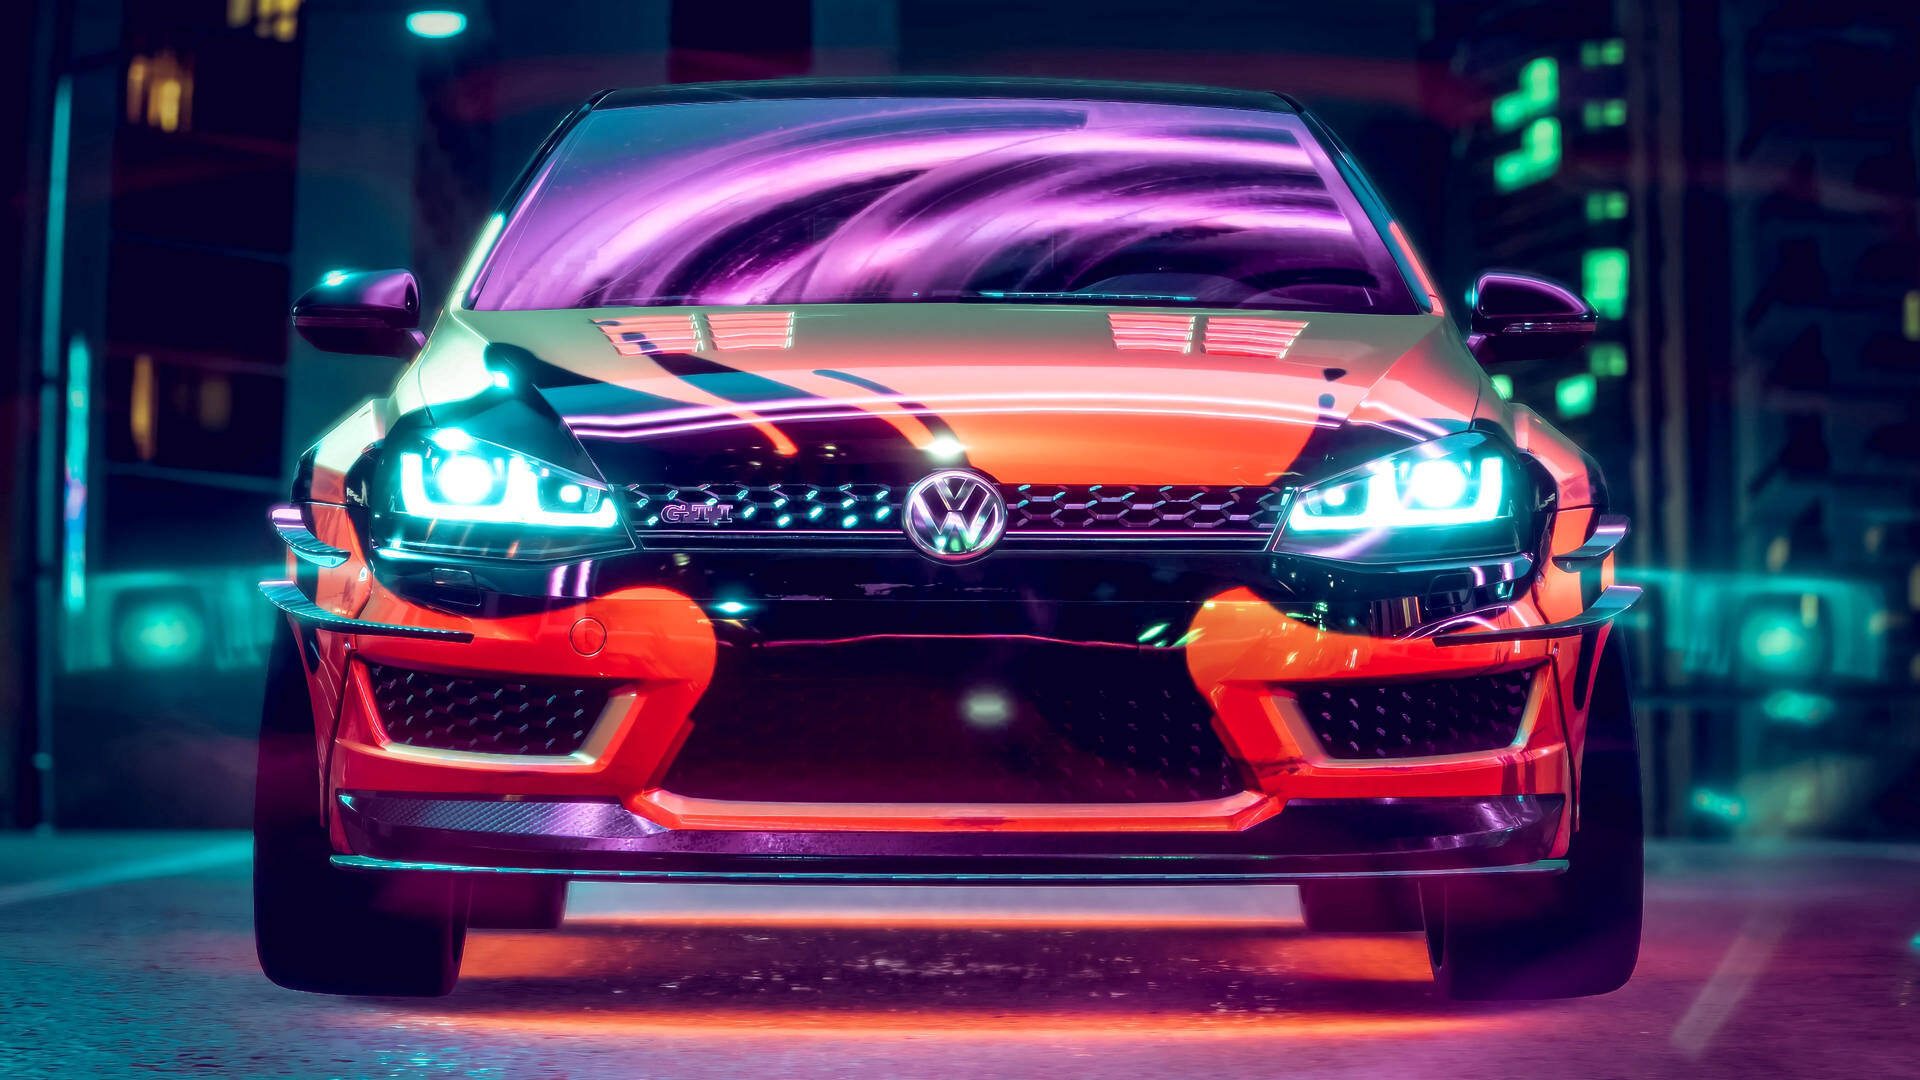 Free Neon Car Background Photos, [100+] Neon Car Background for FREE |  